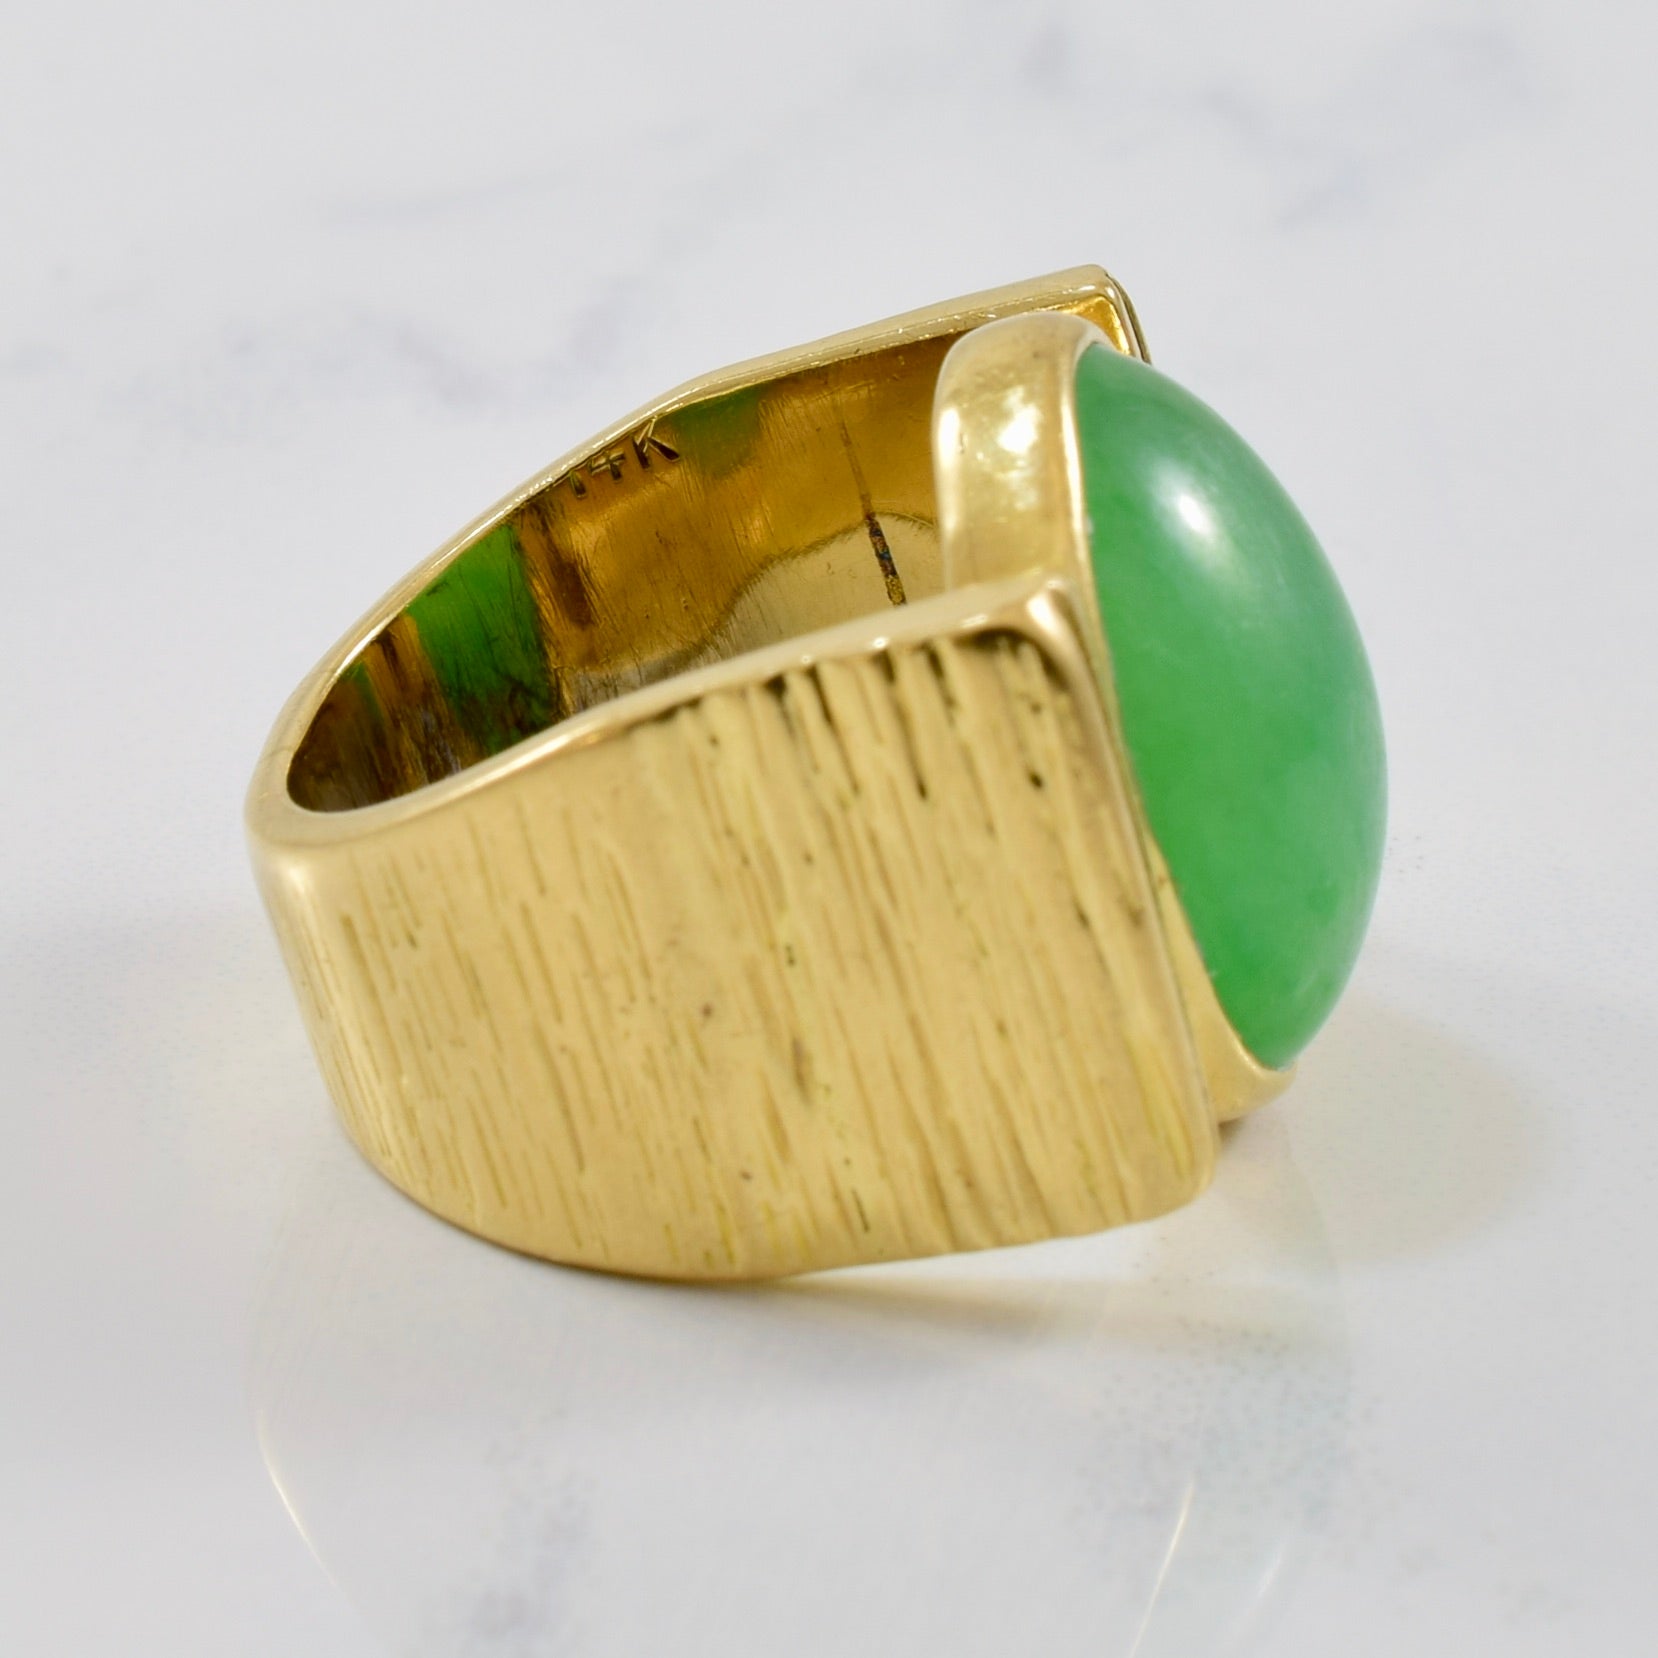 Vintage jade ring with cocktail design, antique ring made with a jade stone